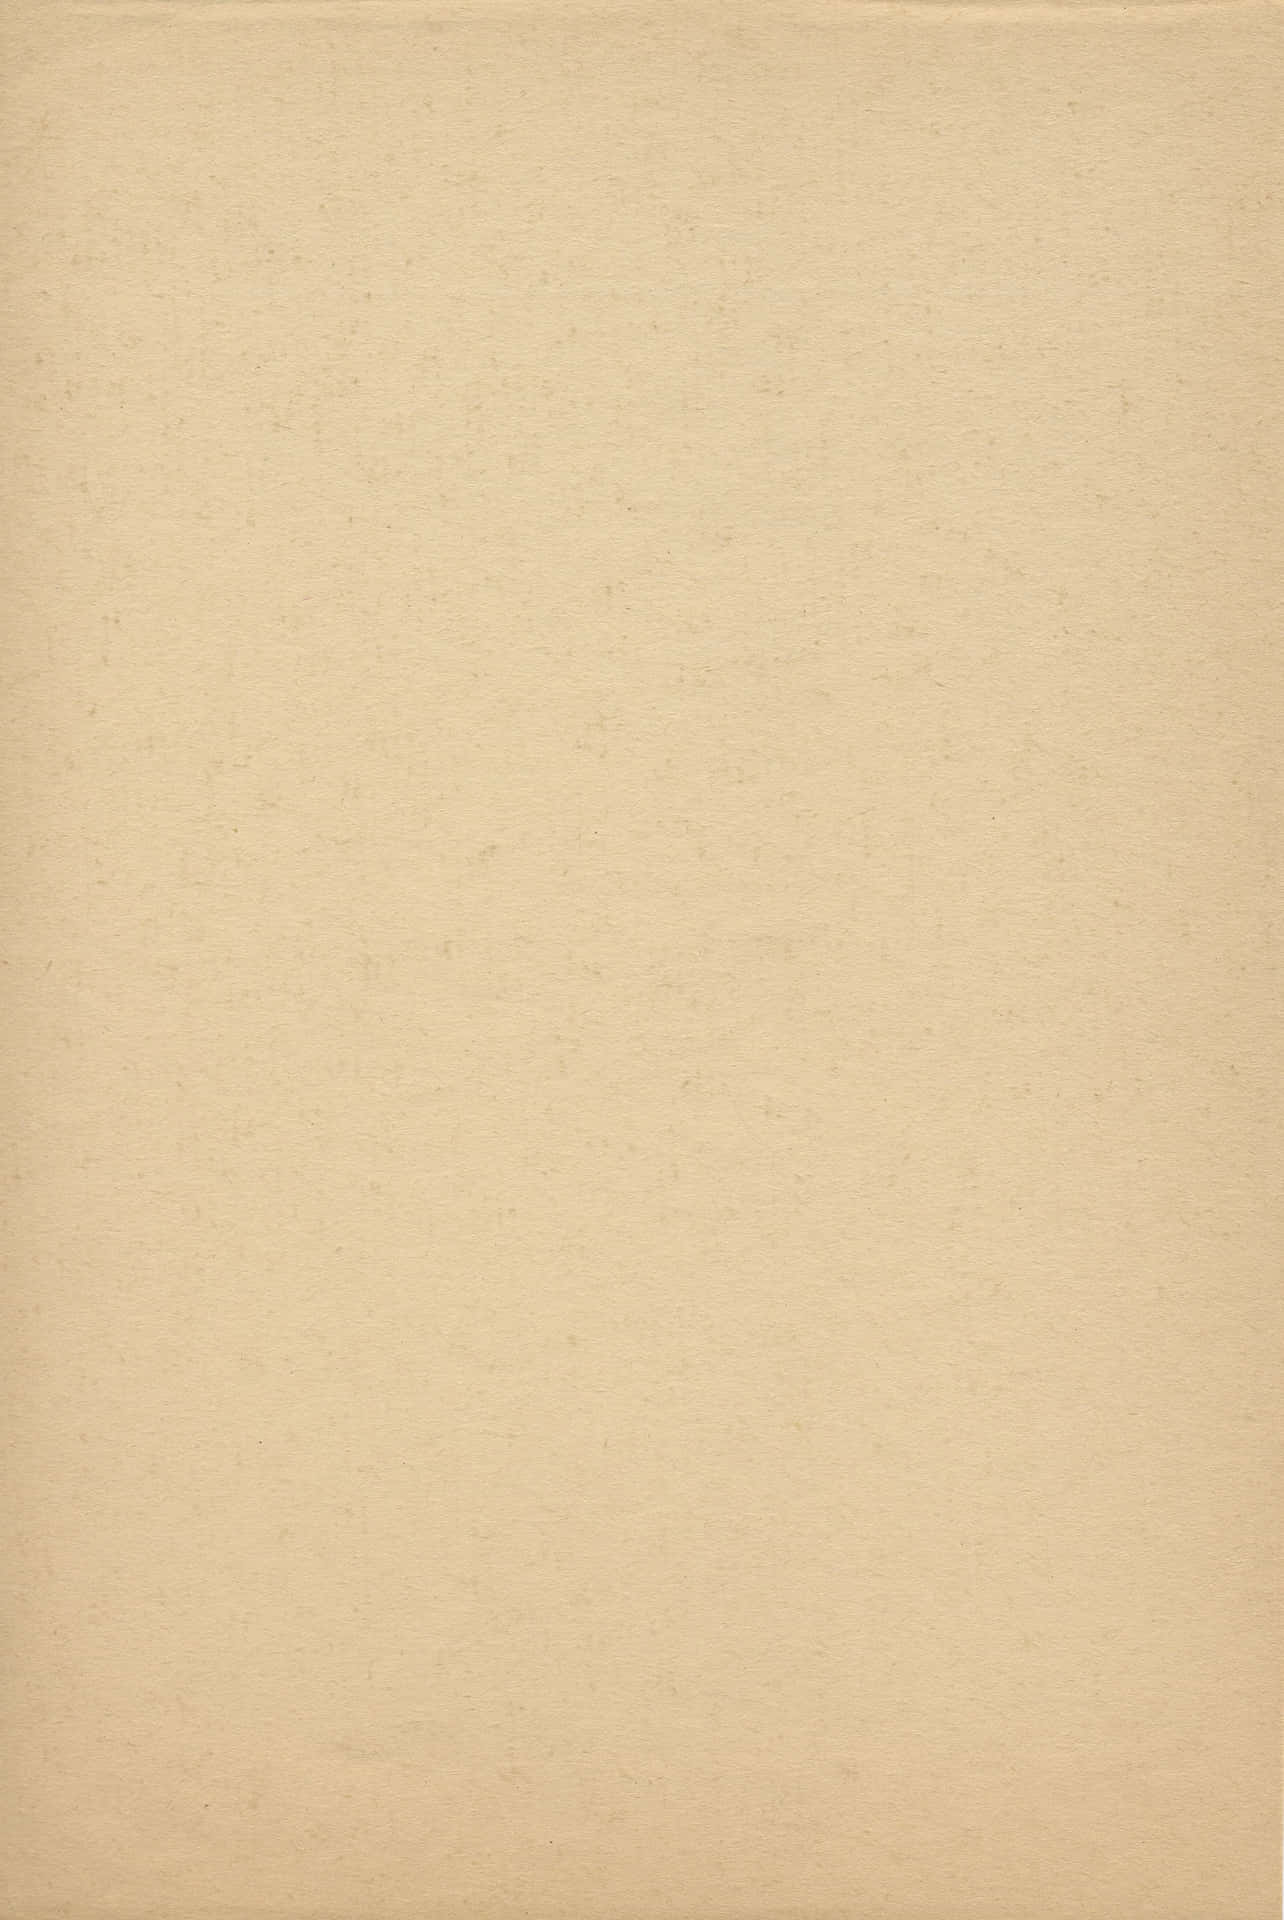 Parchment Background In Light Brown Color